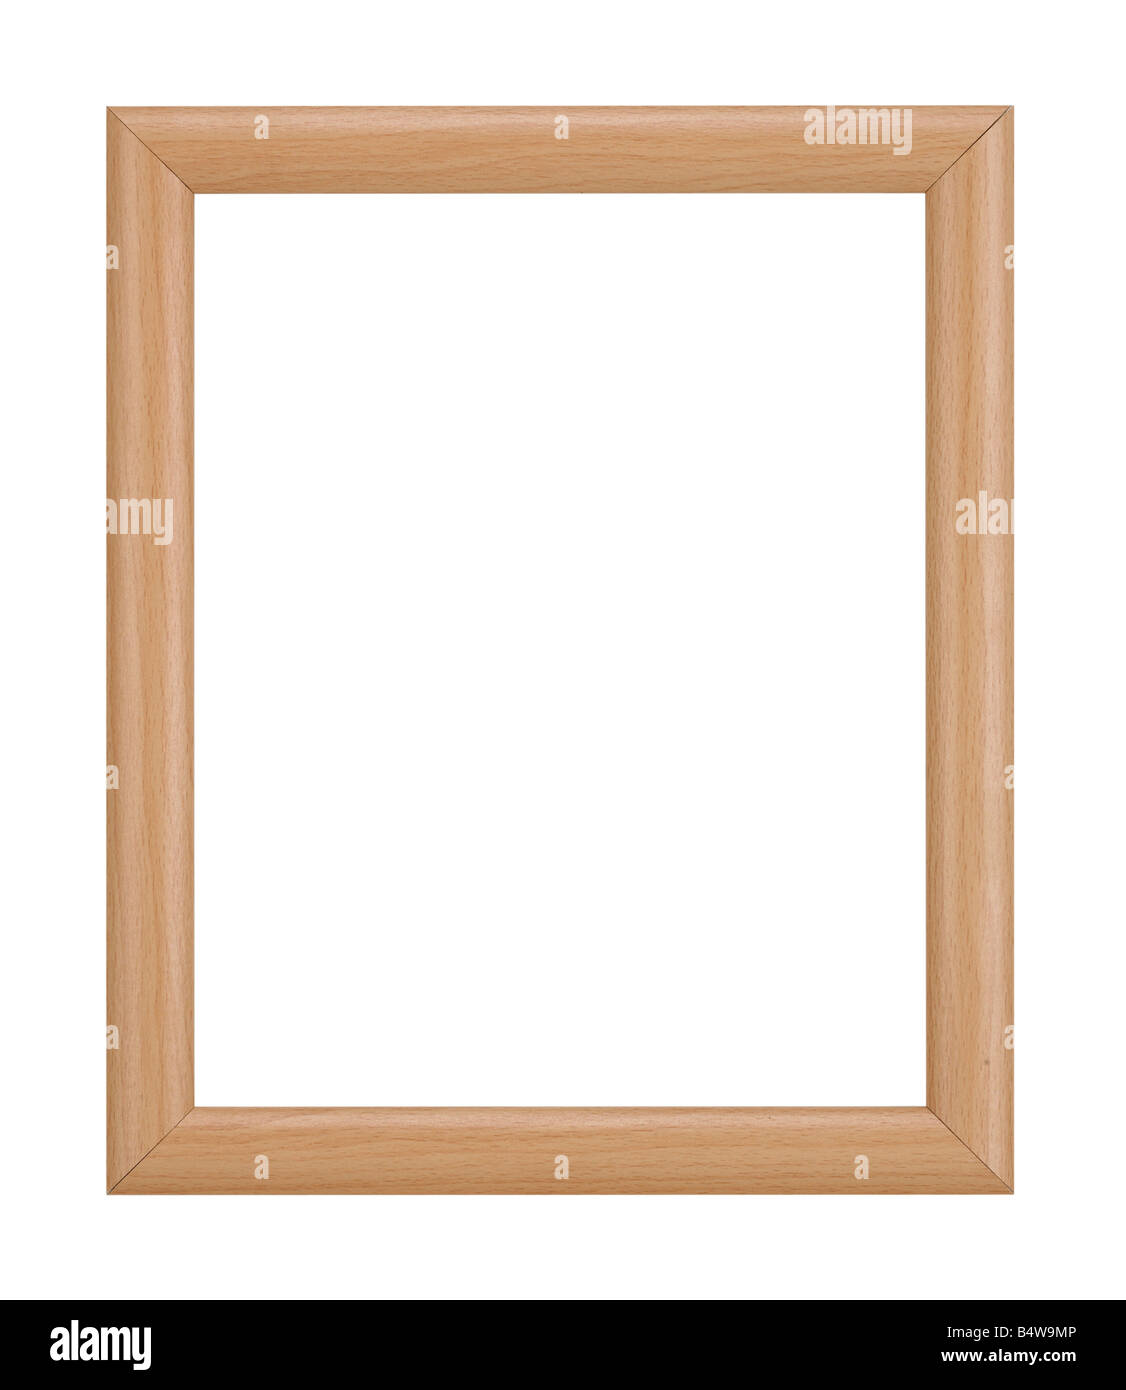 WOOD PICTURE FRAME Stock Photo